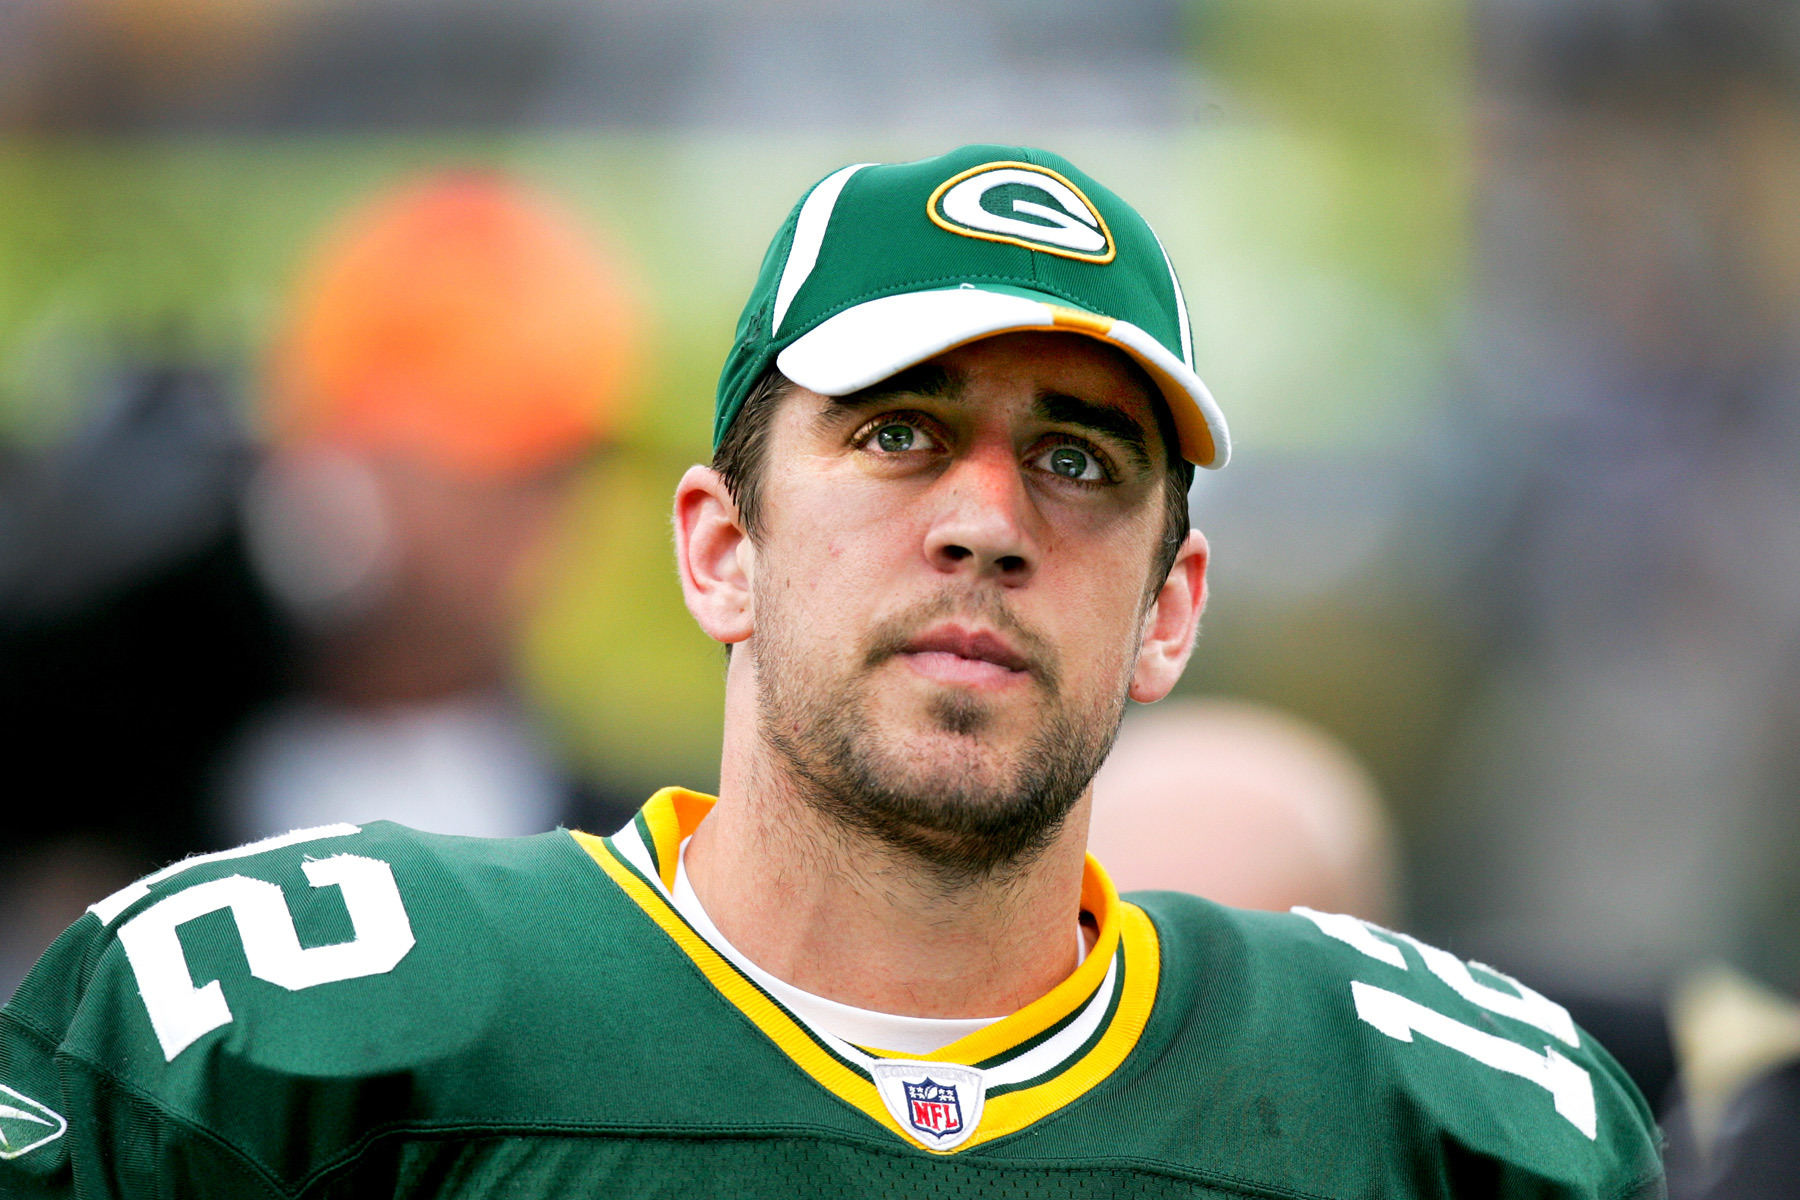 What Is Aaron Rodgers' Net Worth?